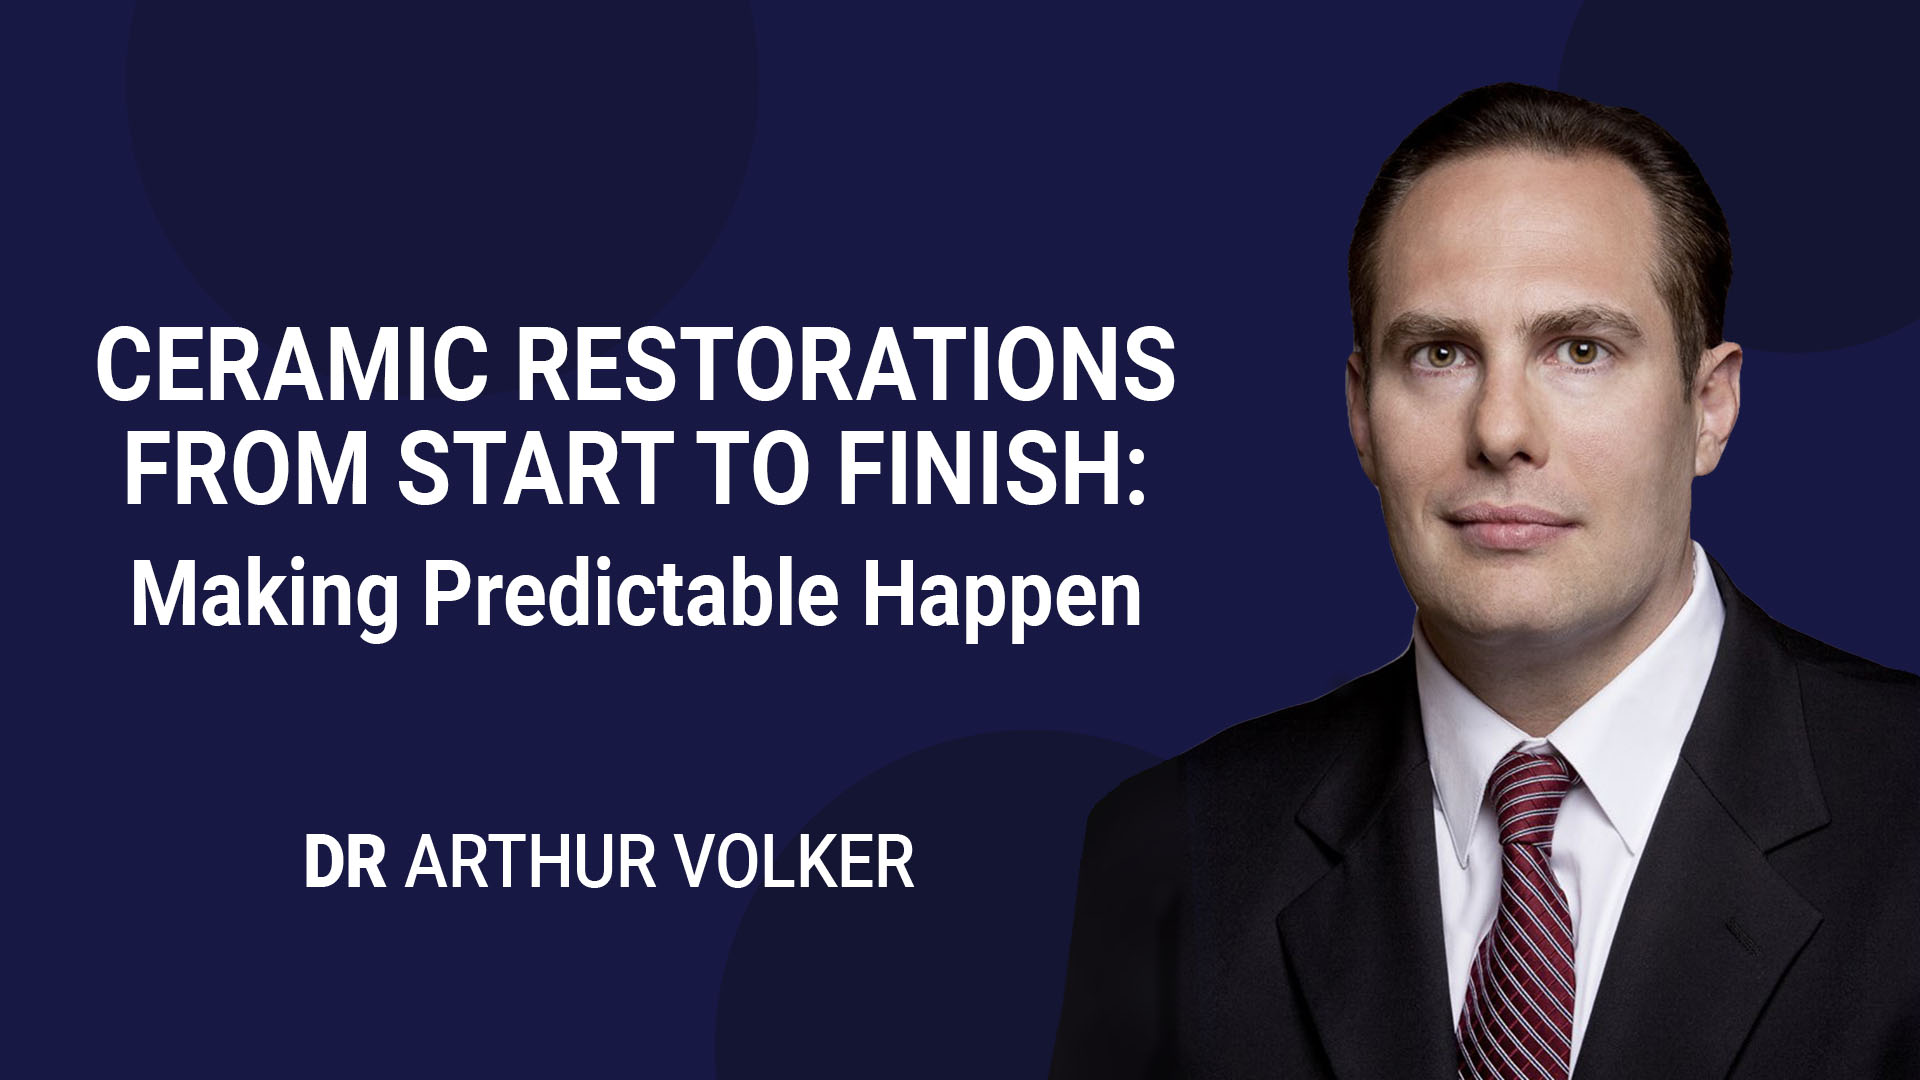 Ceramic Restorations from Start to Finish: Making Predictable Happen